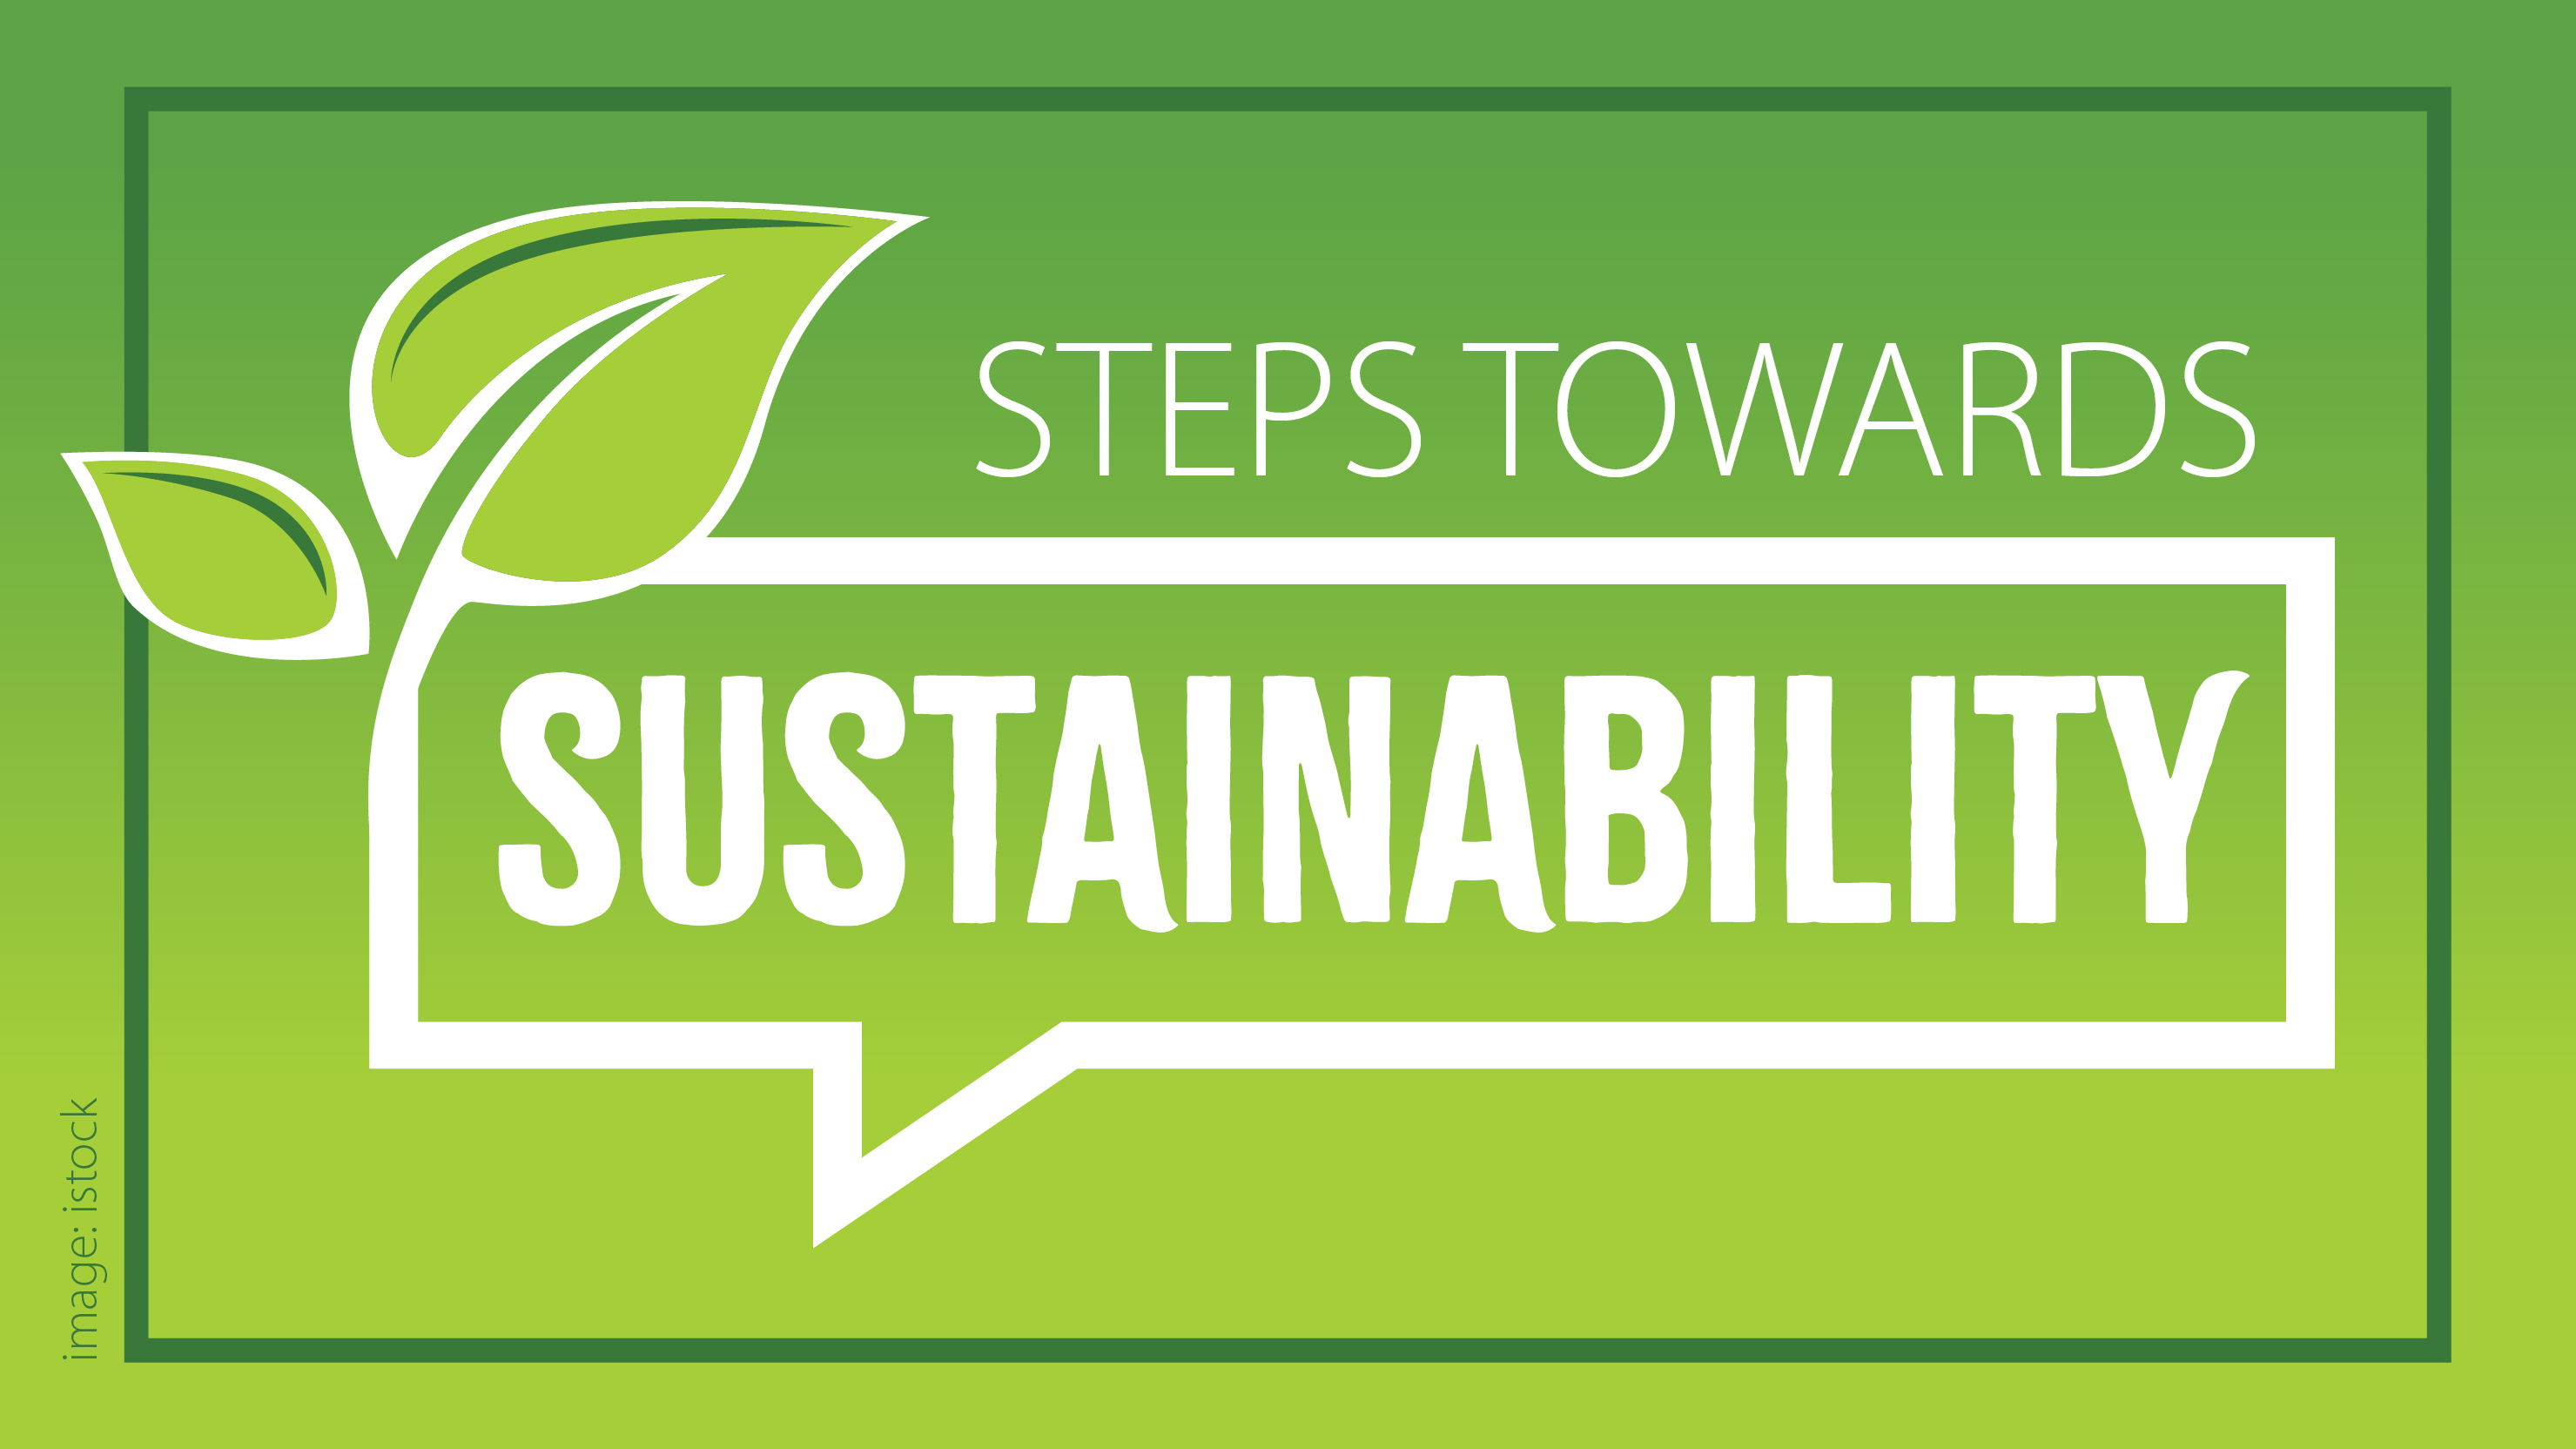 Steps to sustainability